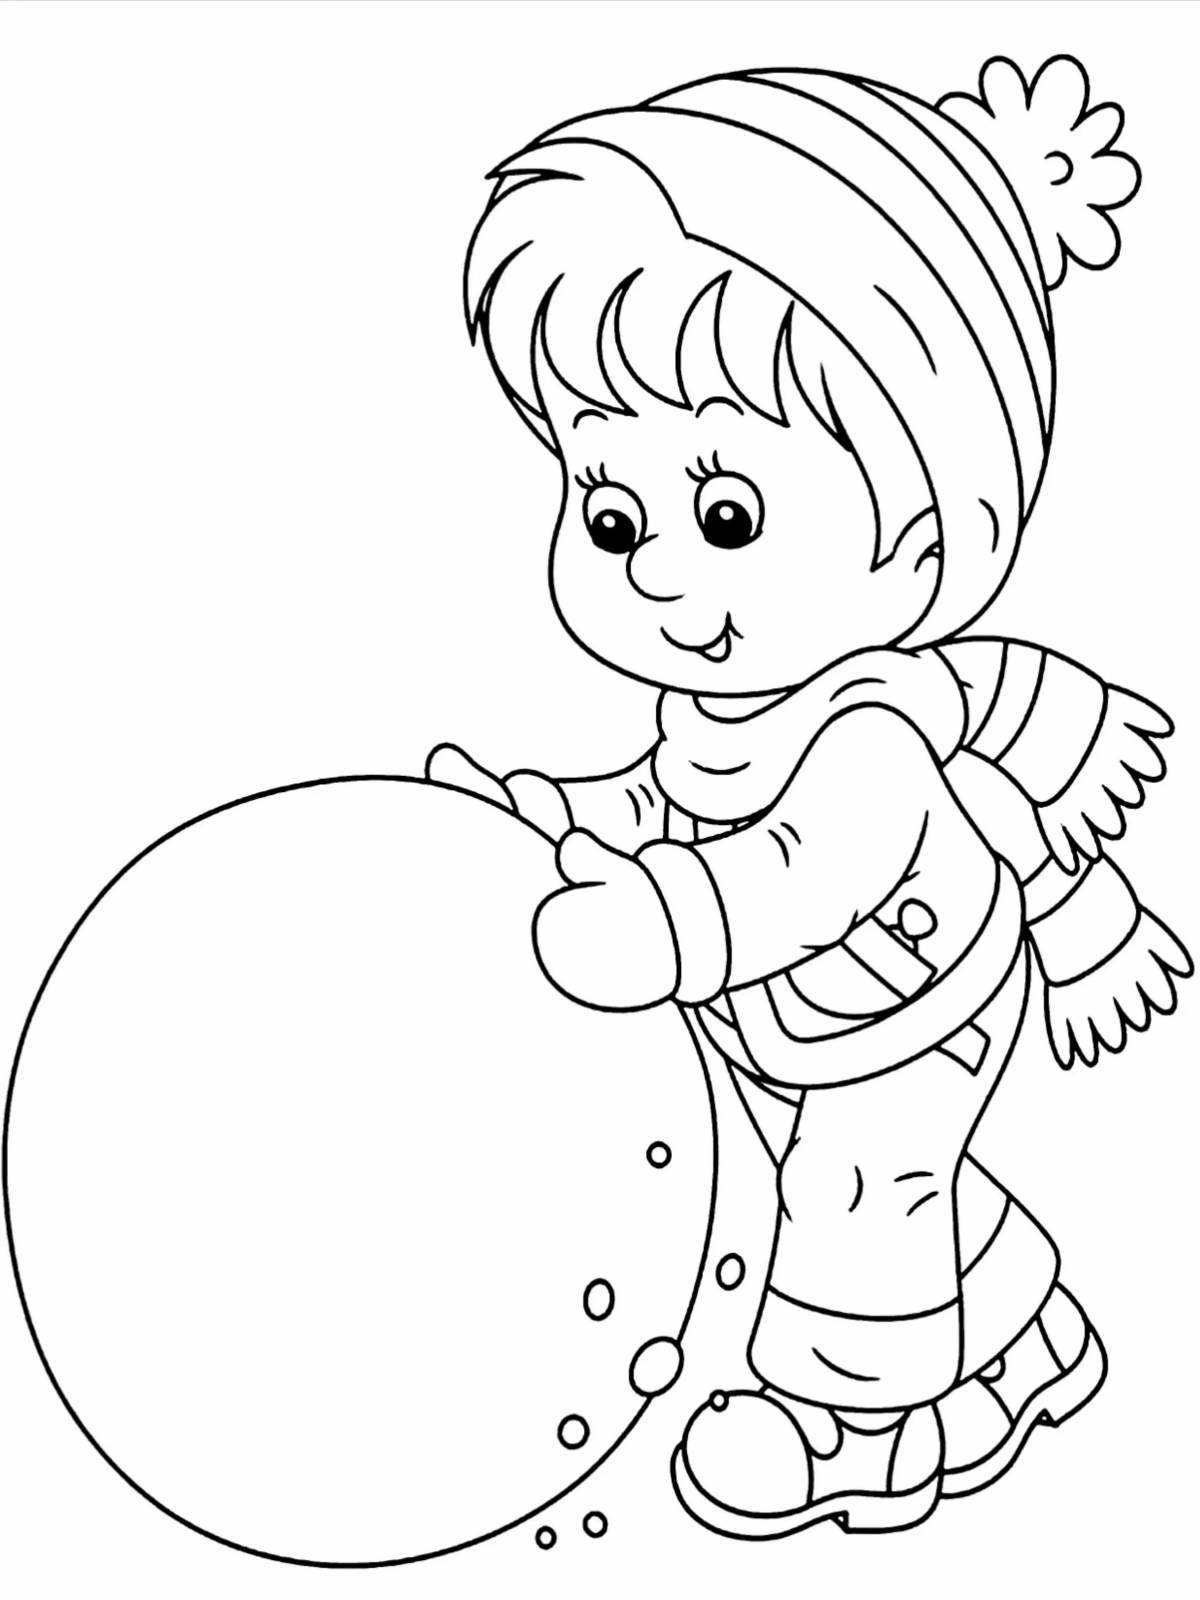 Animated snowball coloring page